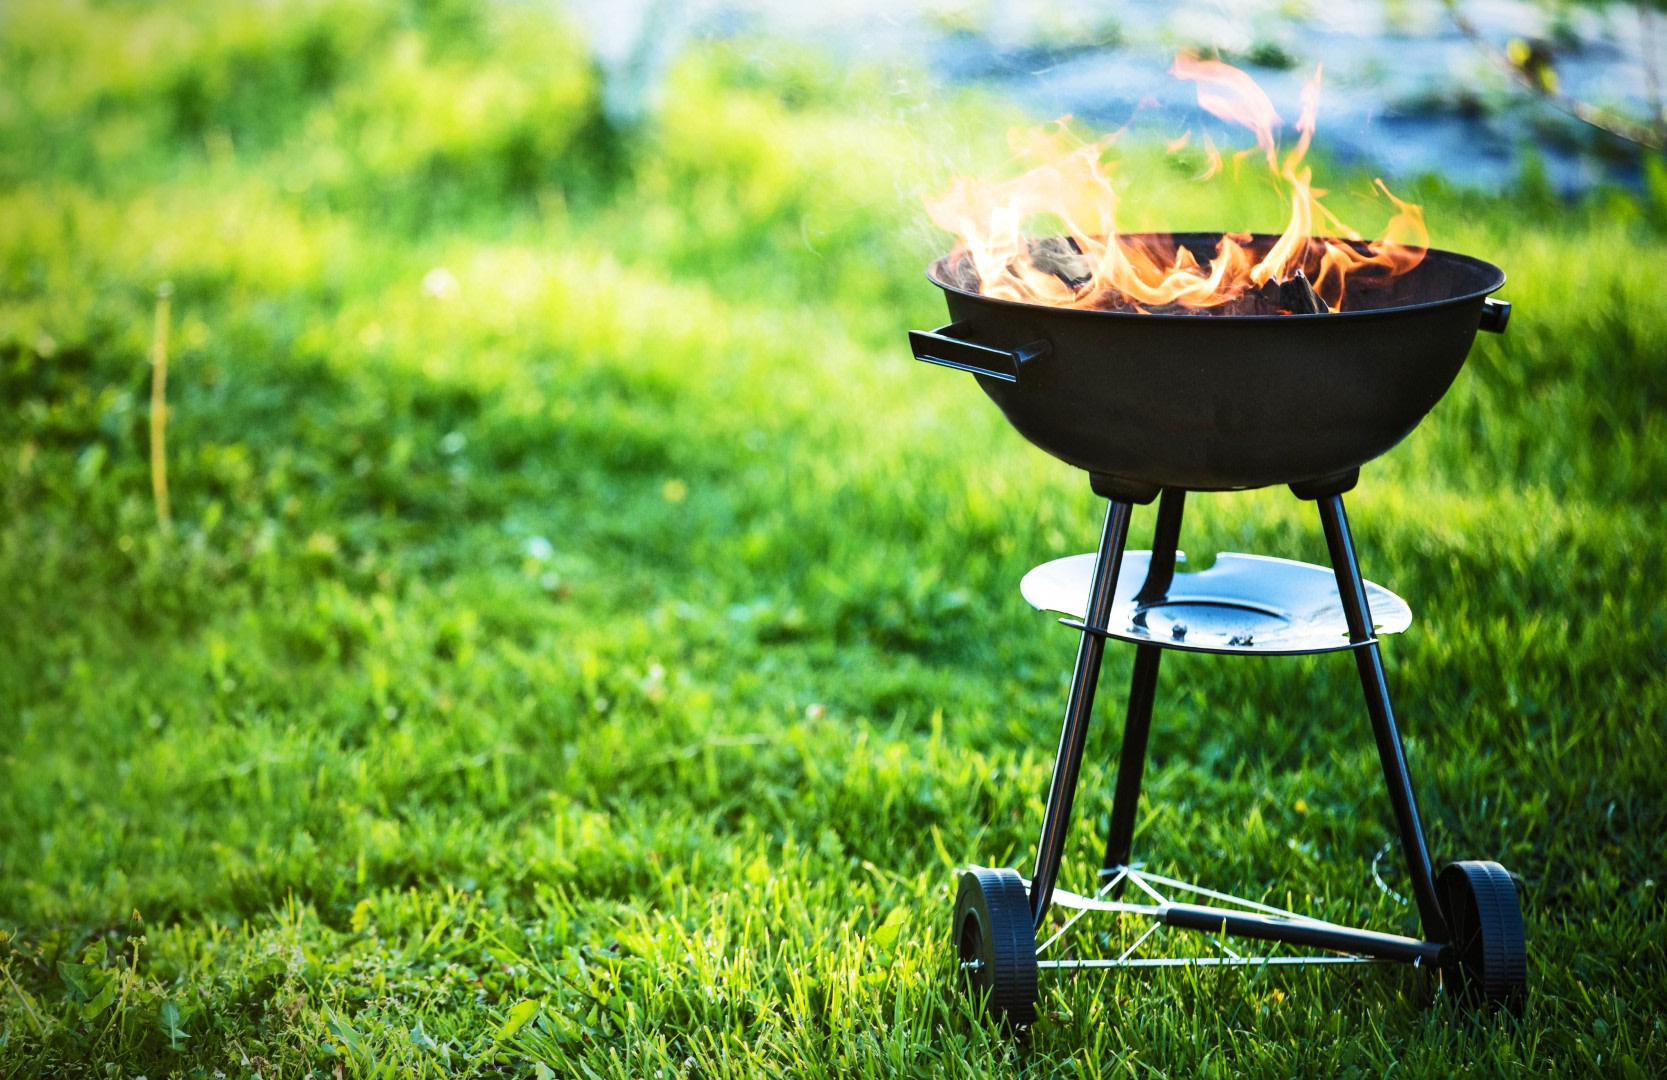 An image related to Best Portable Propane Gas Grills